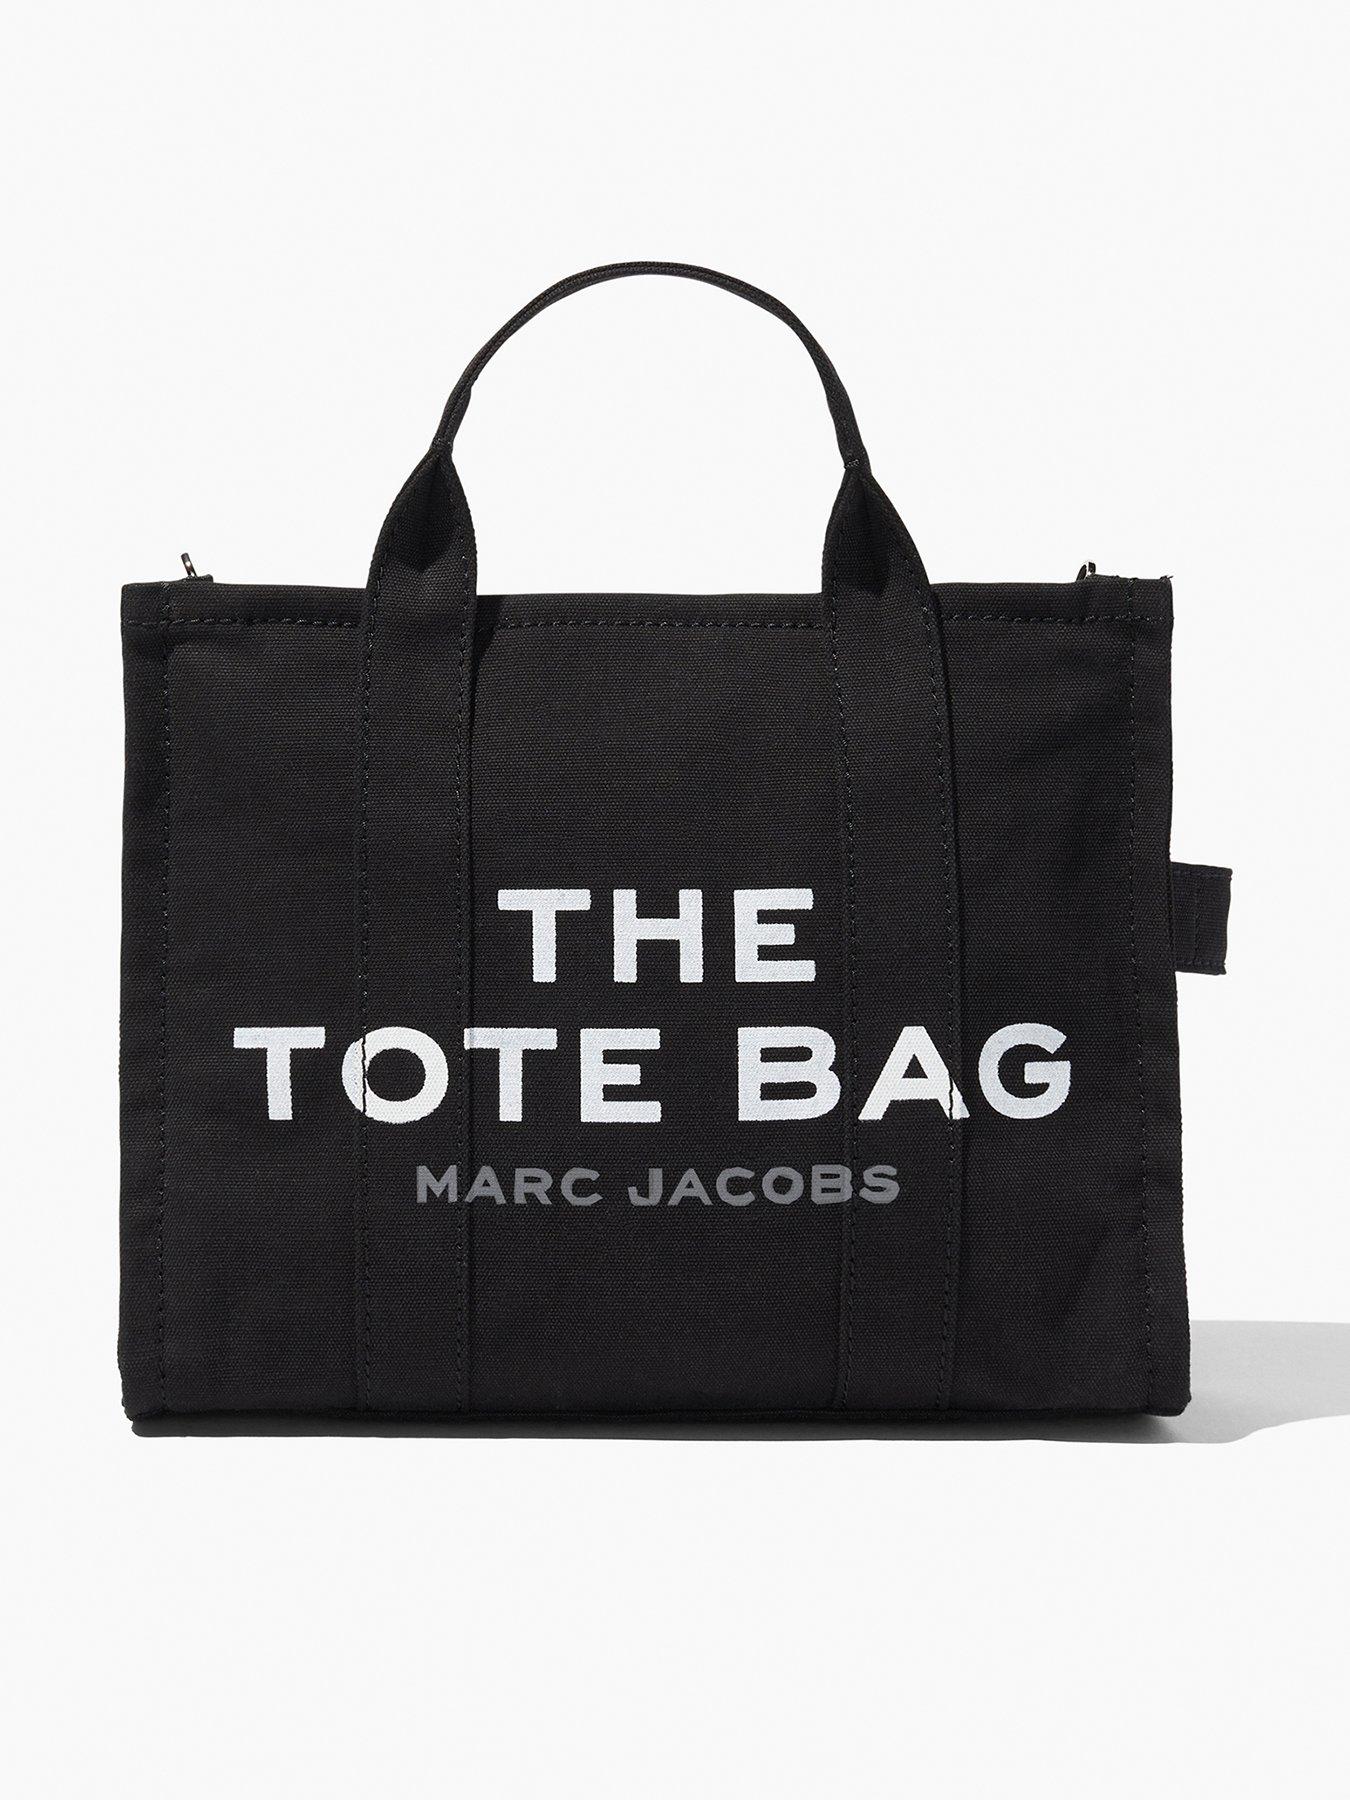 Exploring Marc Jacobs Tote Bag Sizes, Styles, and Features